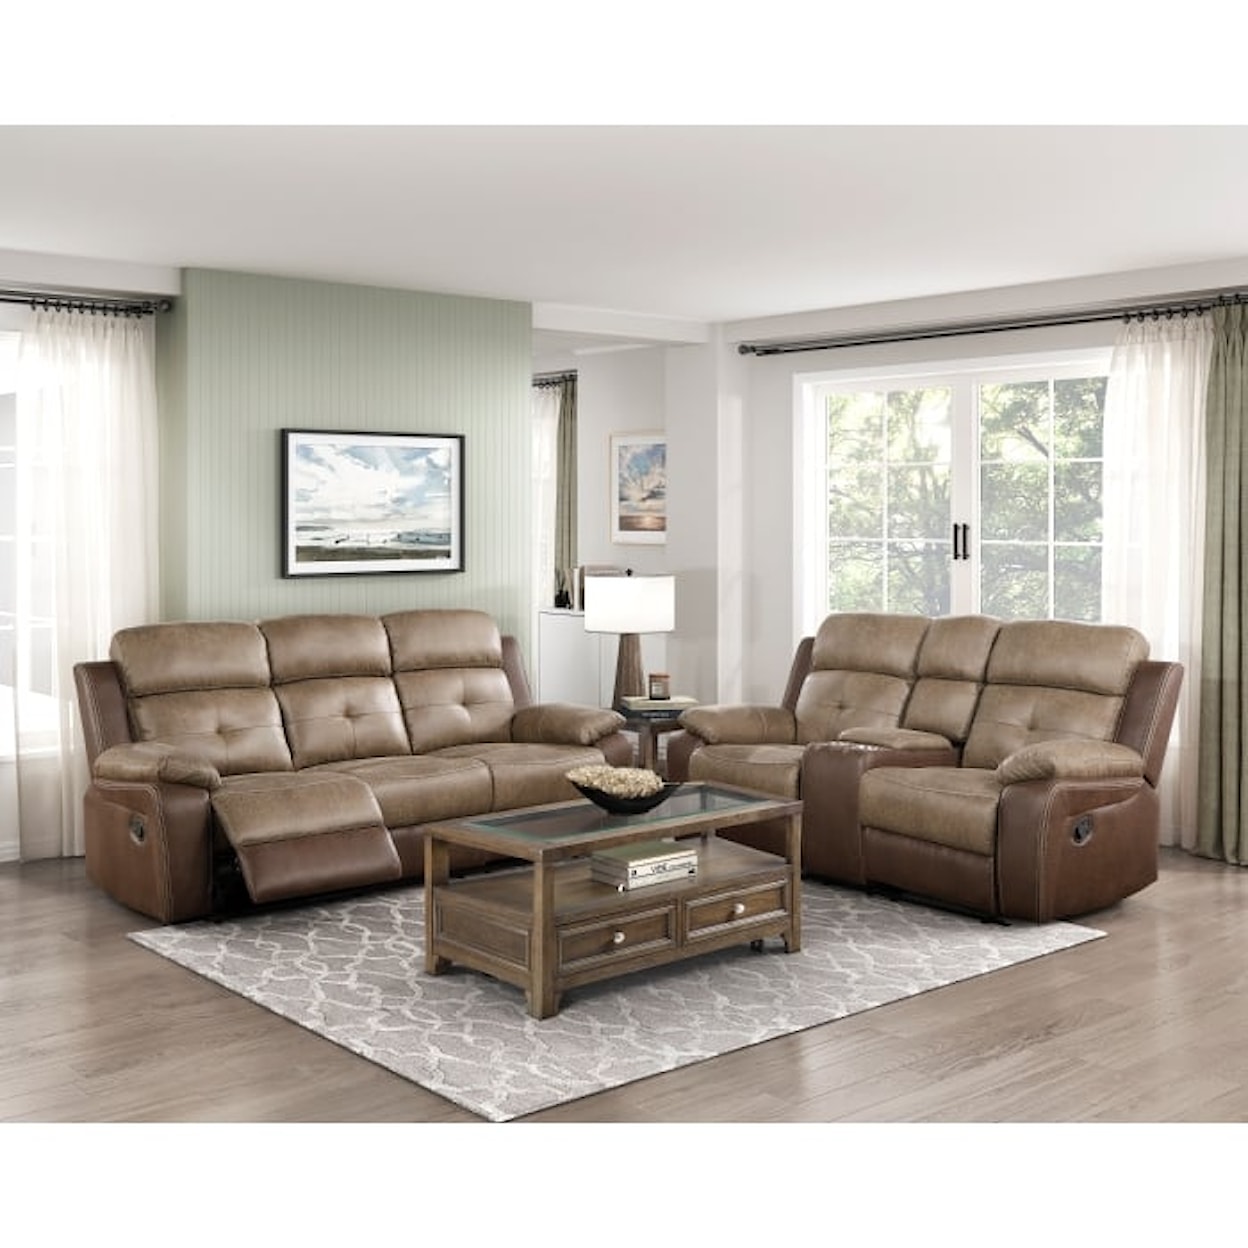 Homelegance Furniture Glendale Reclining Love Seat with Center Console